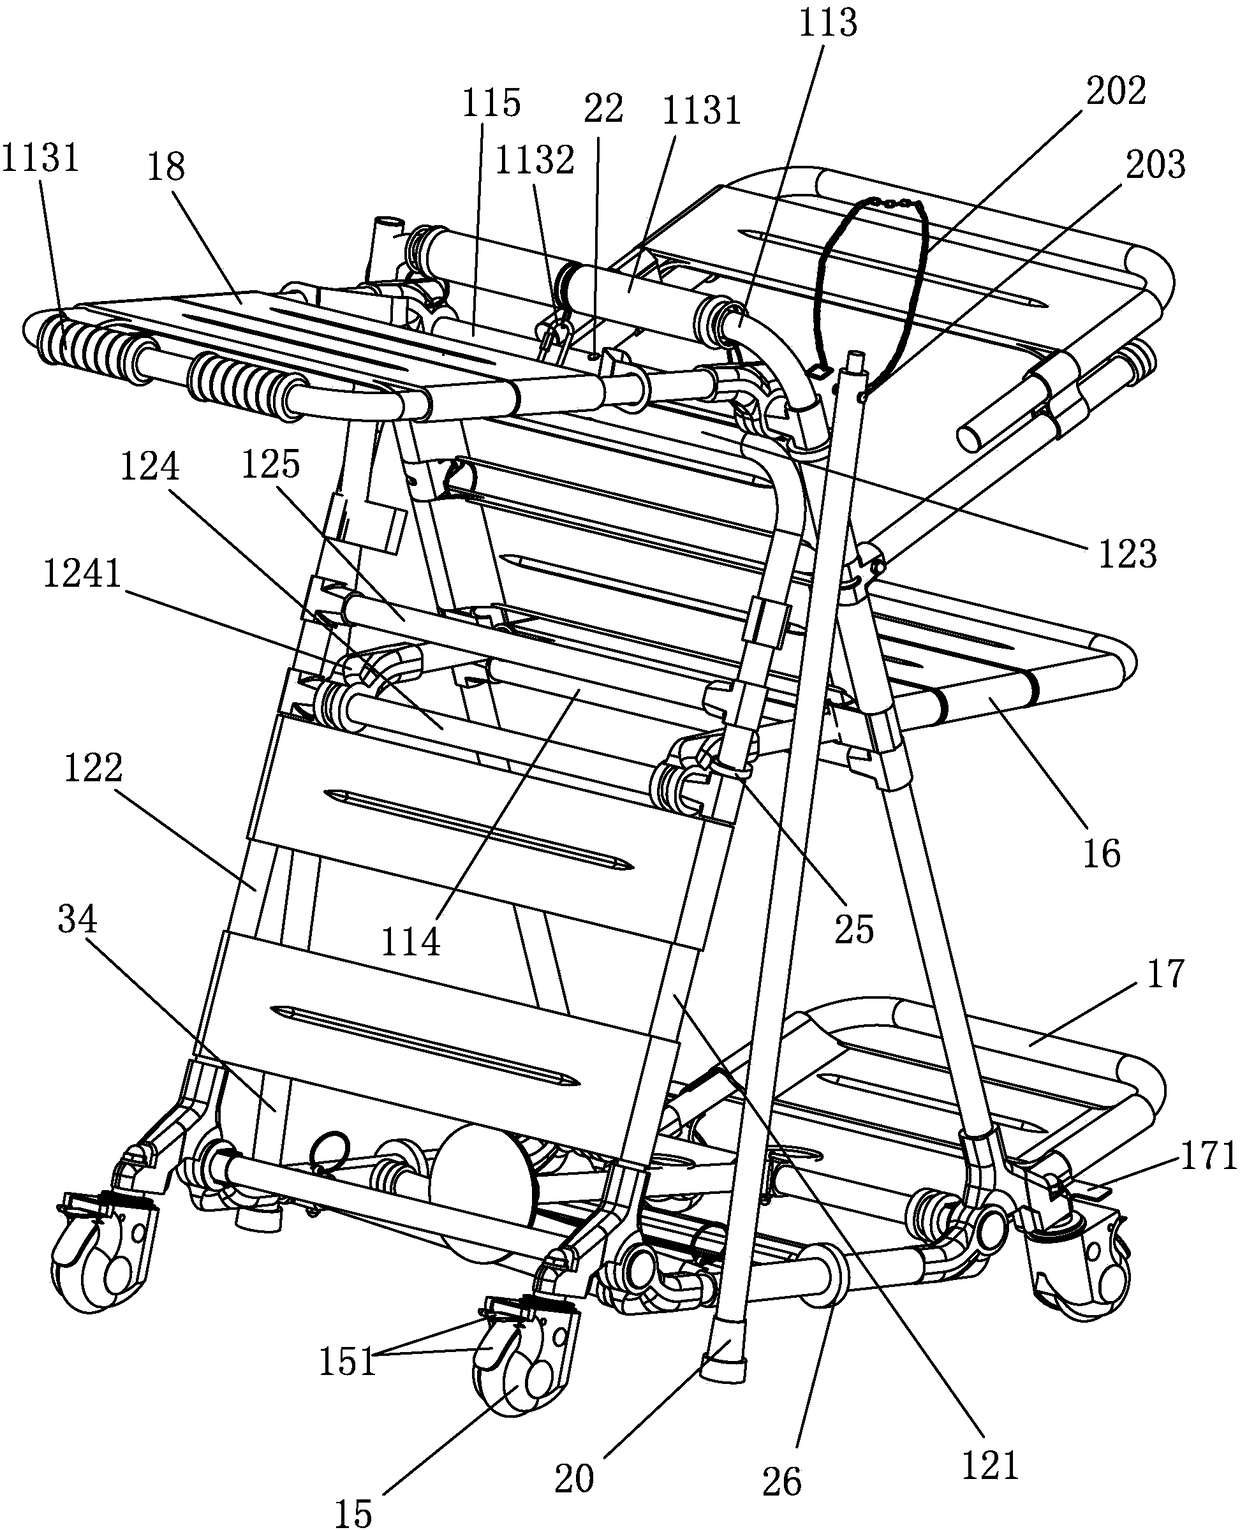 Multifunctional rollator that can be operated on its side